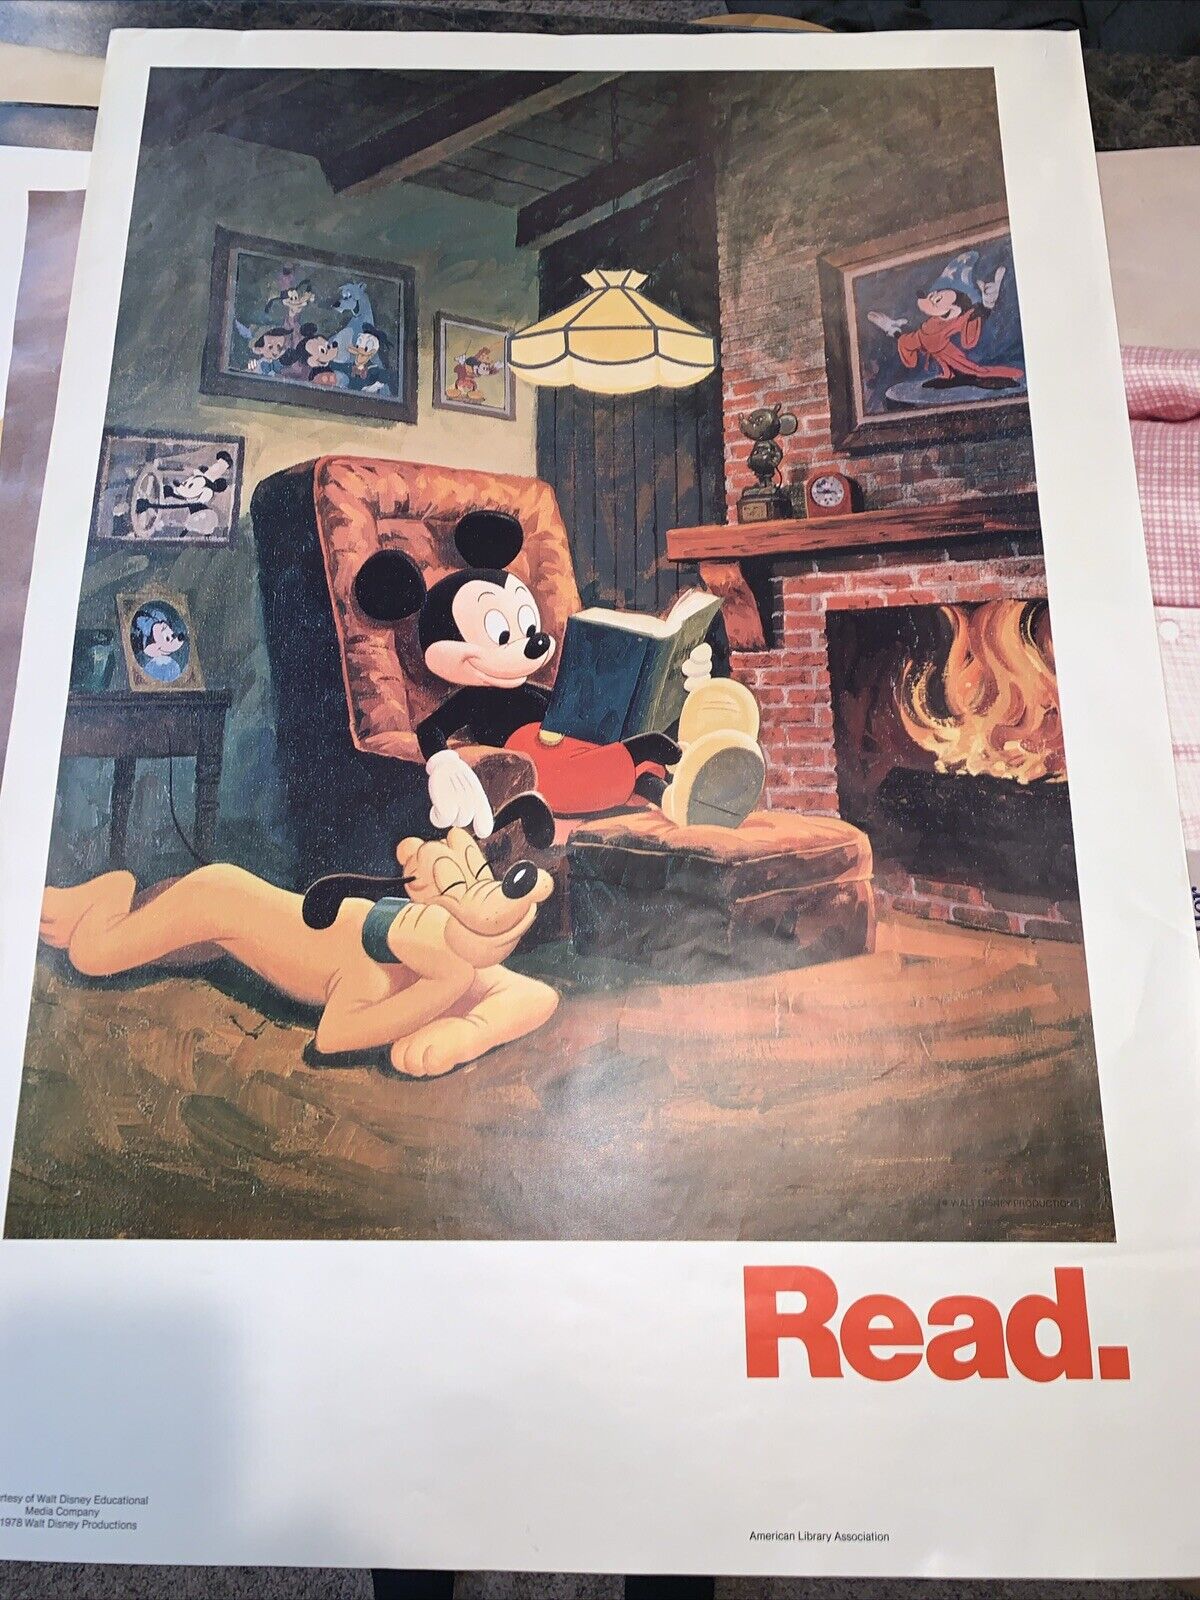 RARE 1978 DISNEY MICKEY MOUSE 1ST READ POSTER AMERICAN LIBRARY ASSOC.  Mint